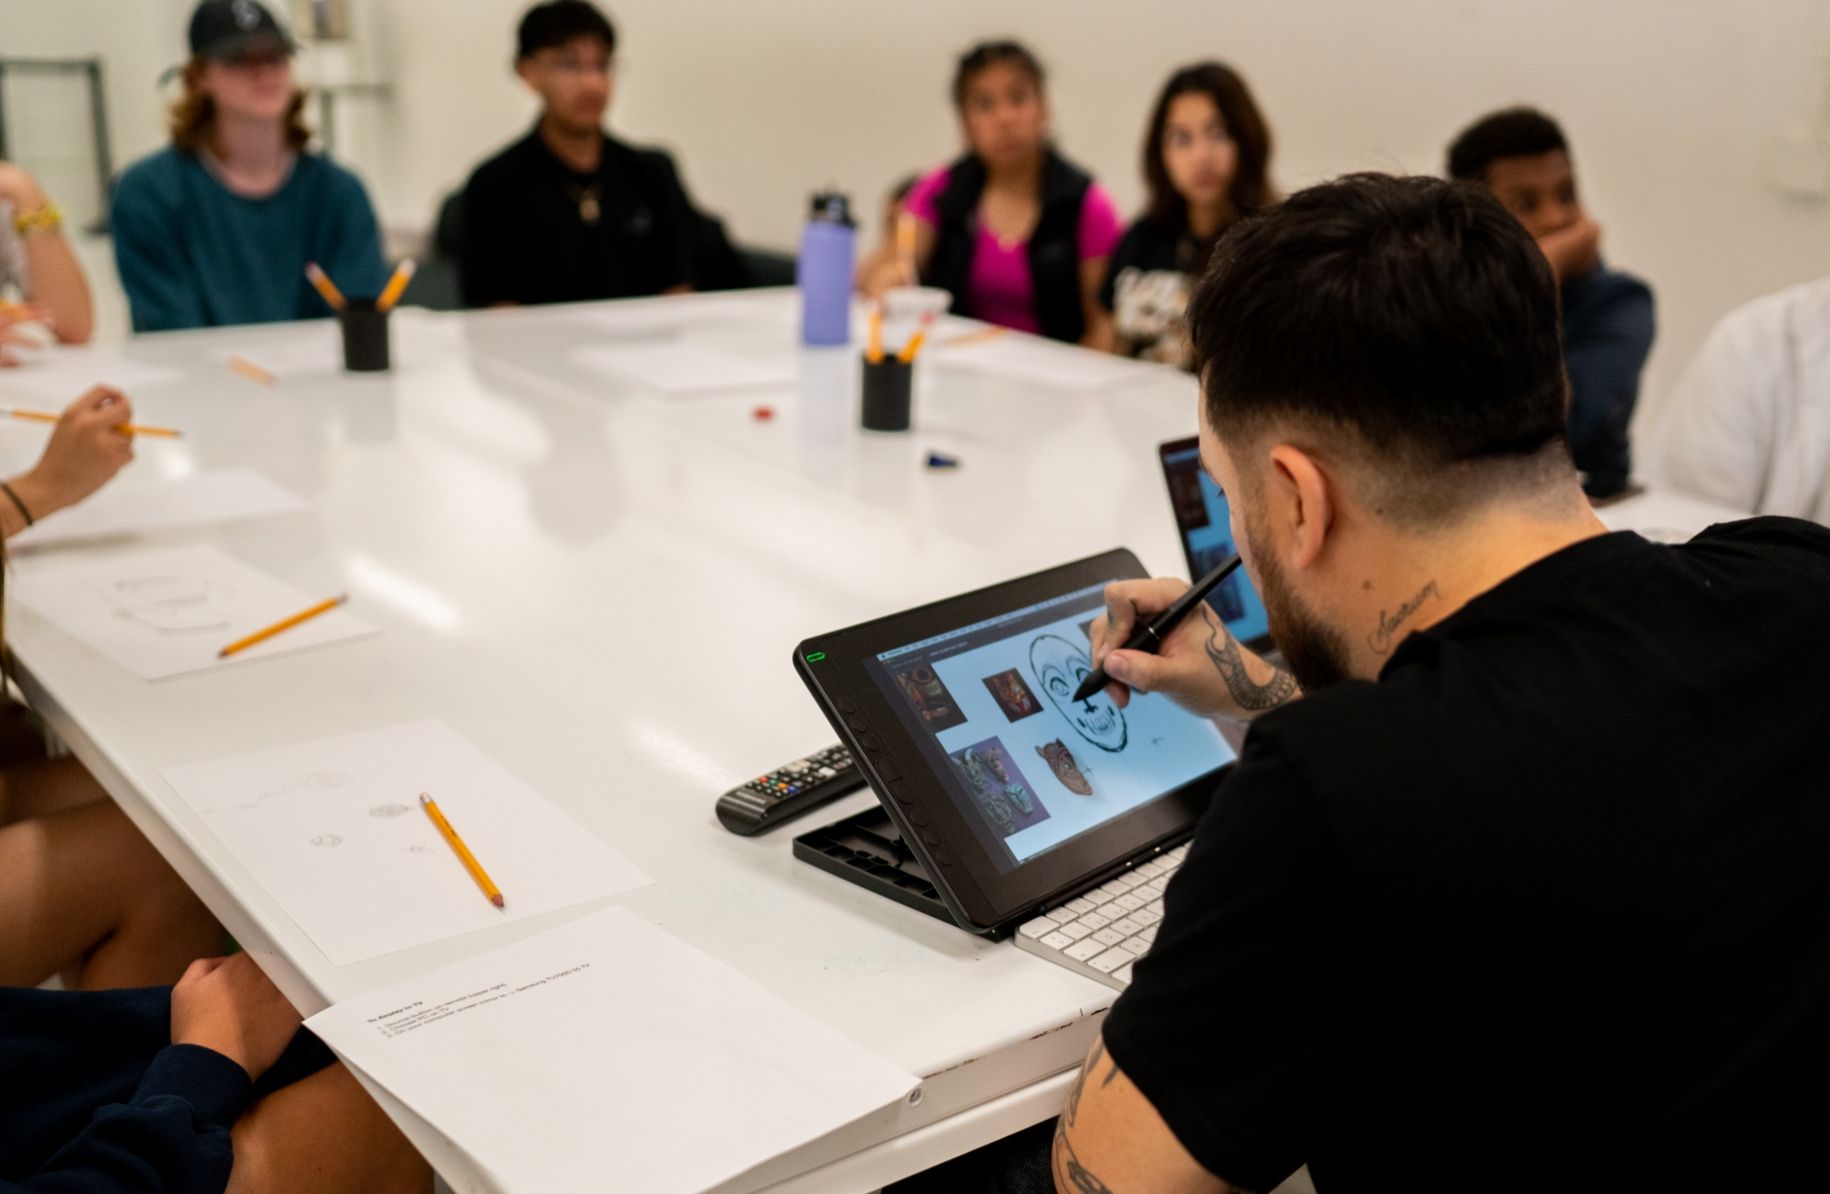 Man working on a laptop with digital artwork displayed on the screen, surrounded by attentive students seated around a long white table in a classroom.